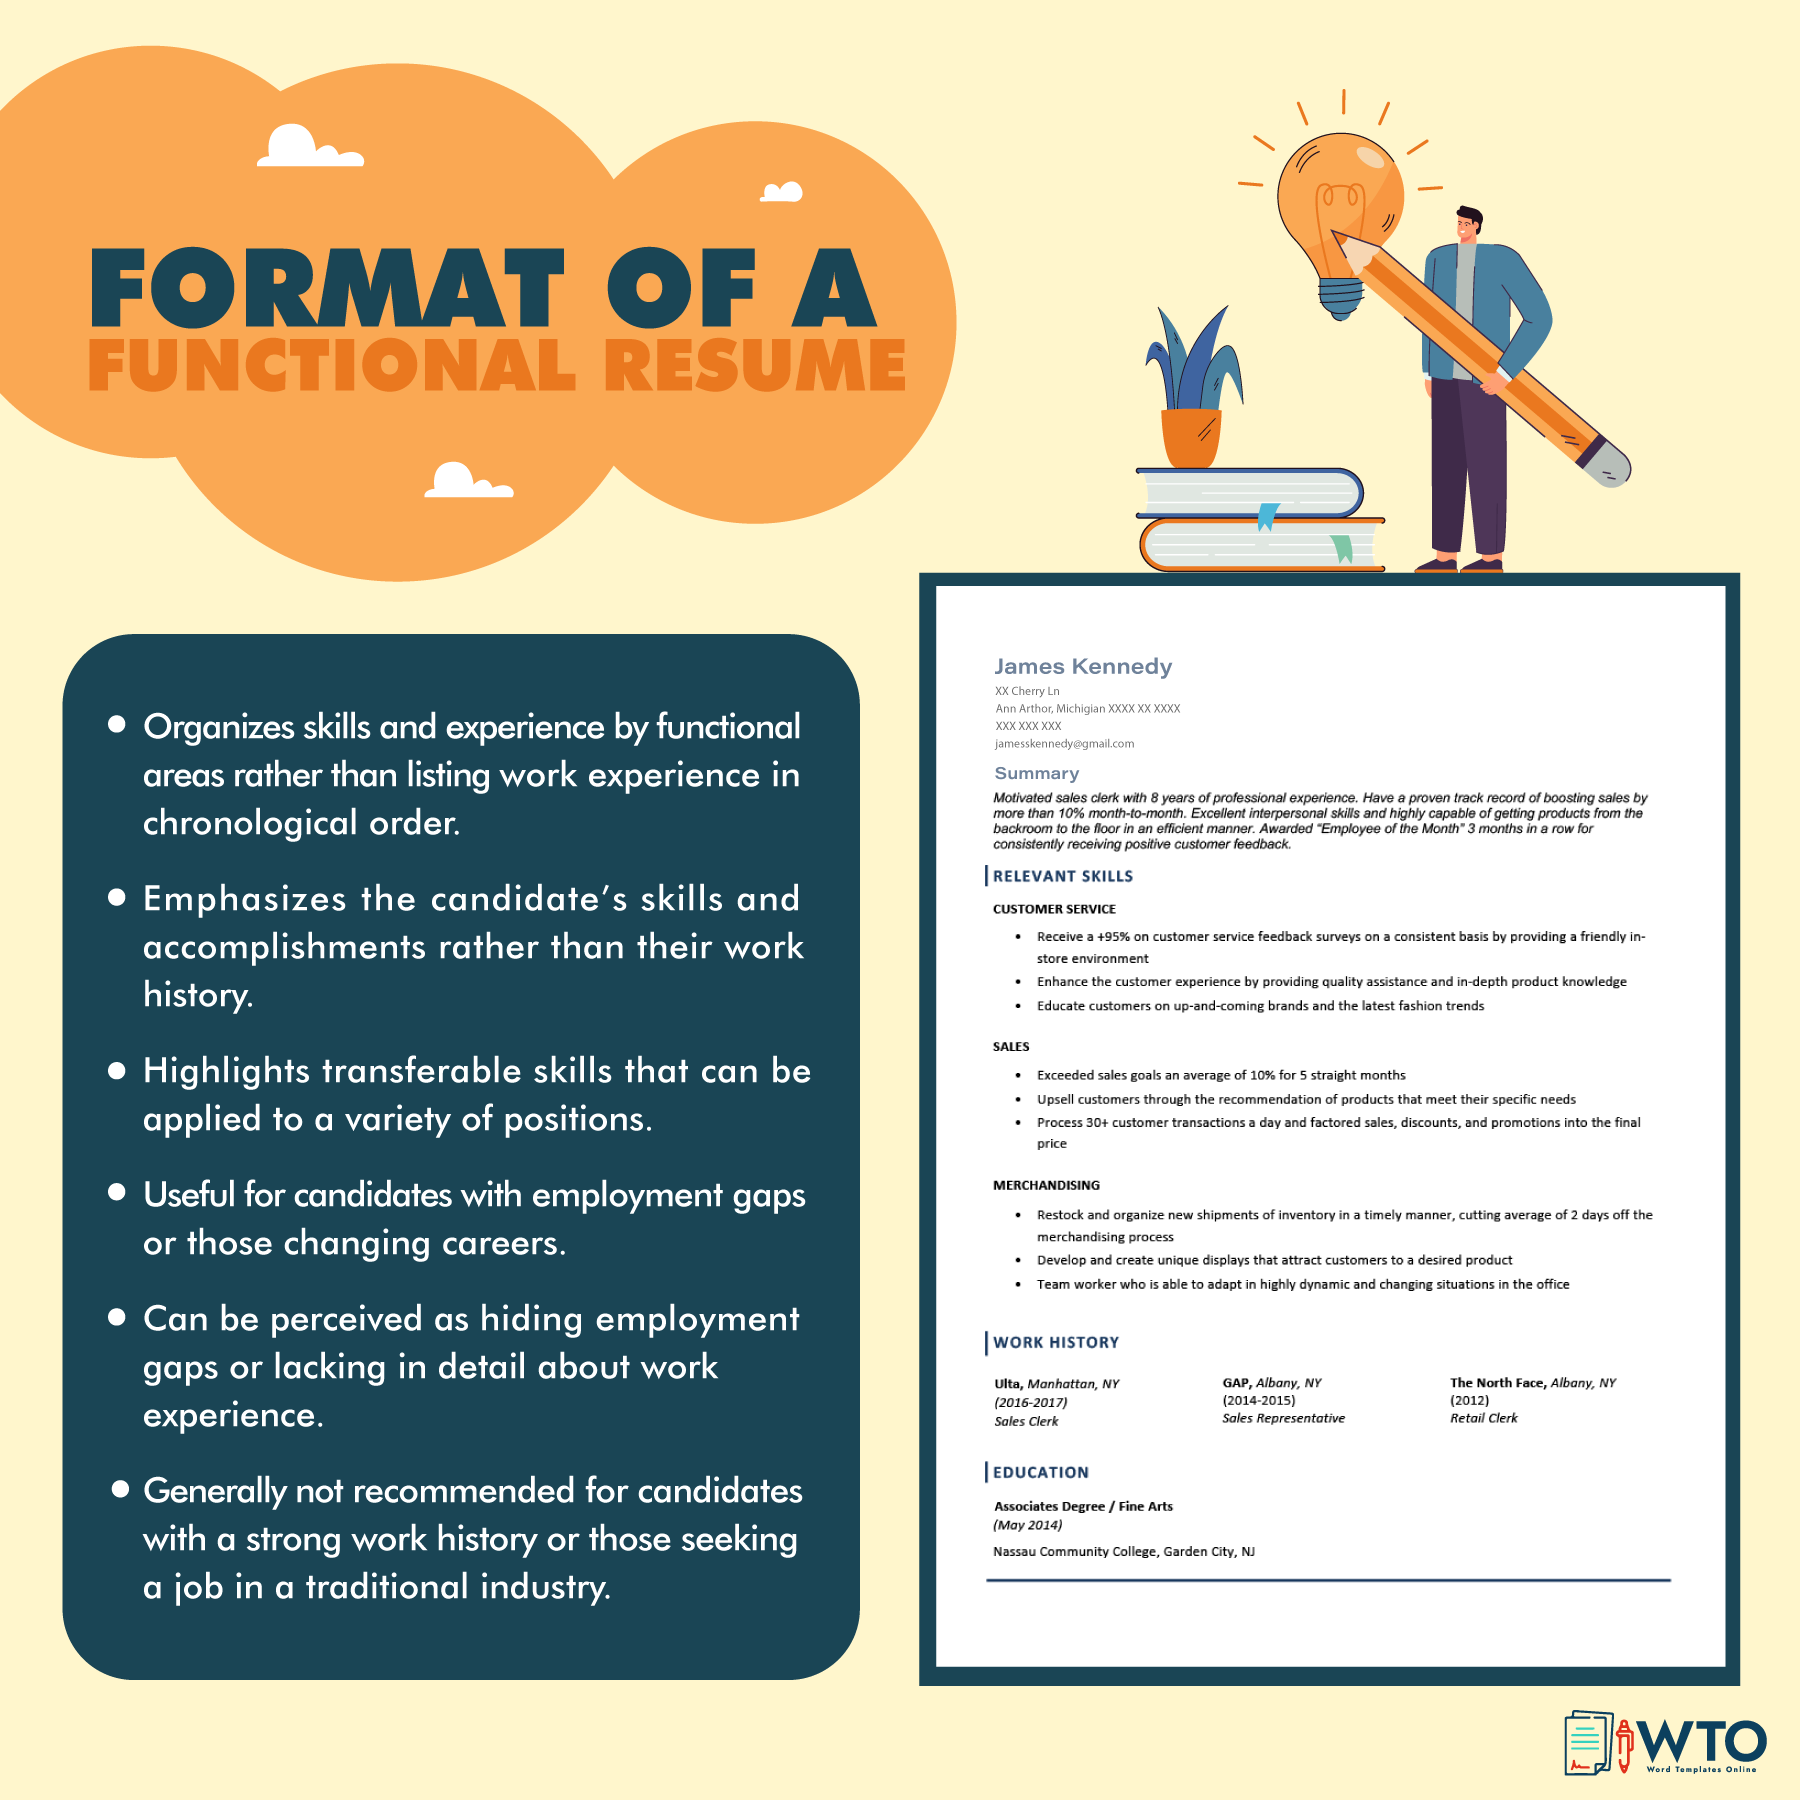 This infographic is about the format of a Functional Resume.